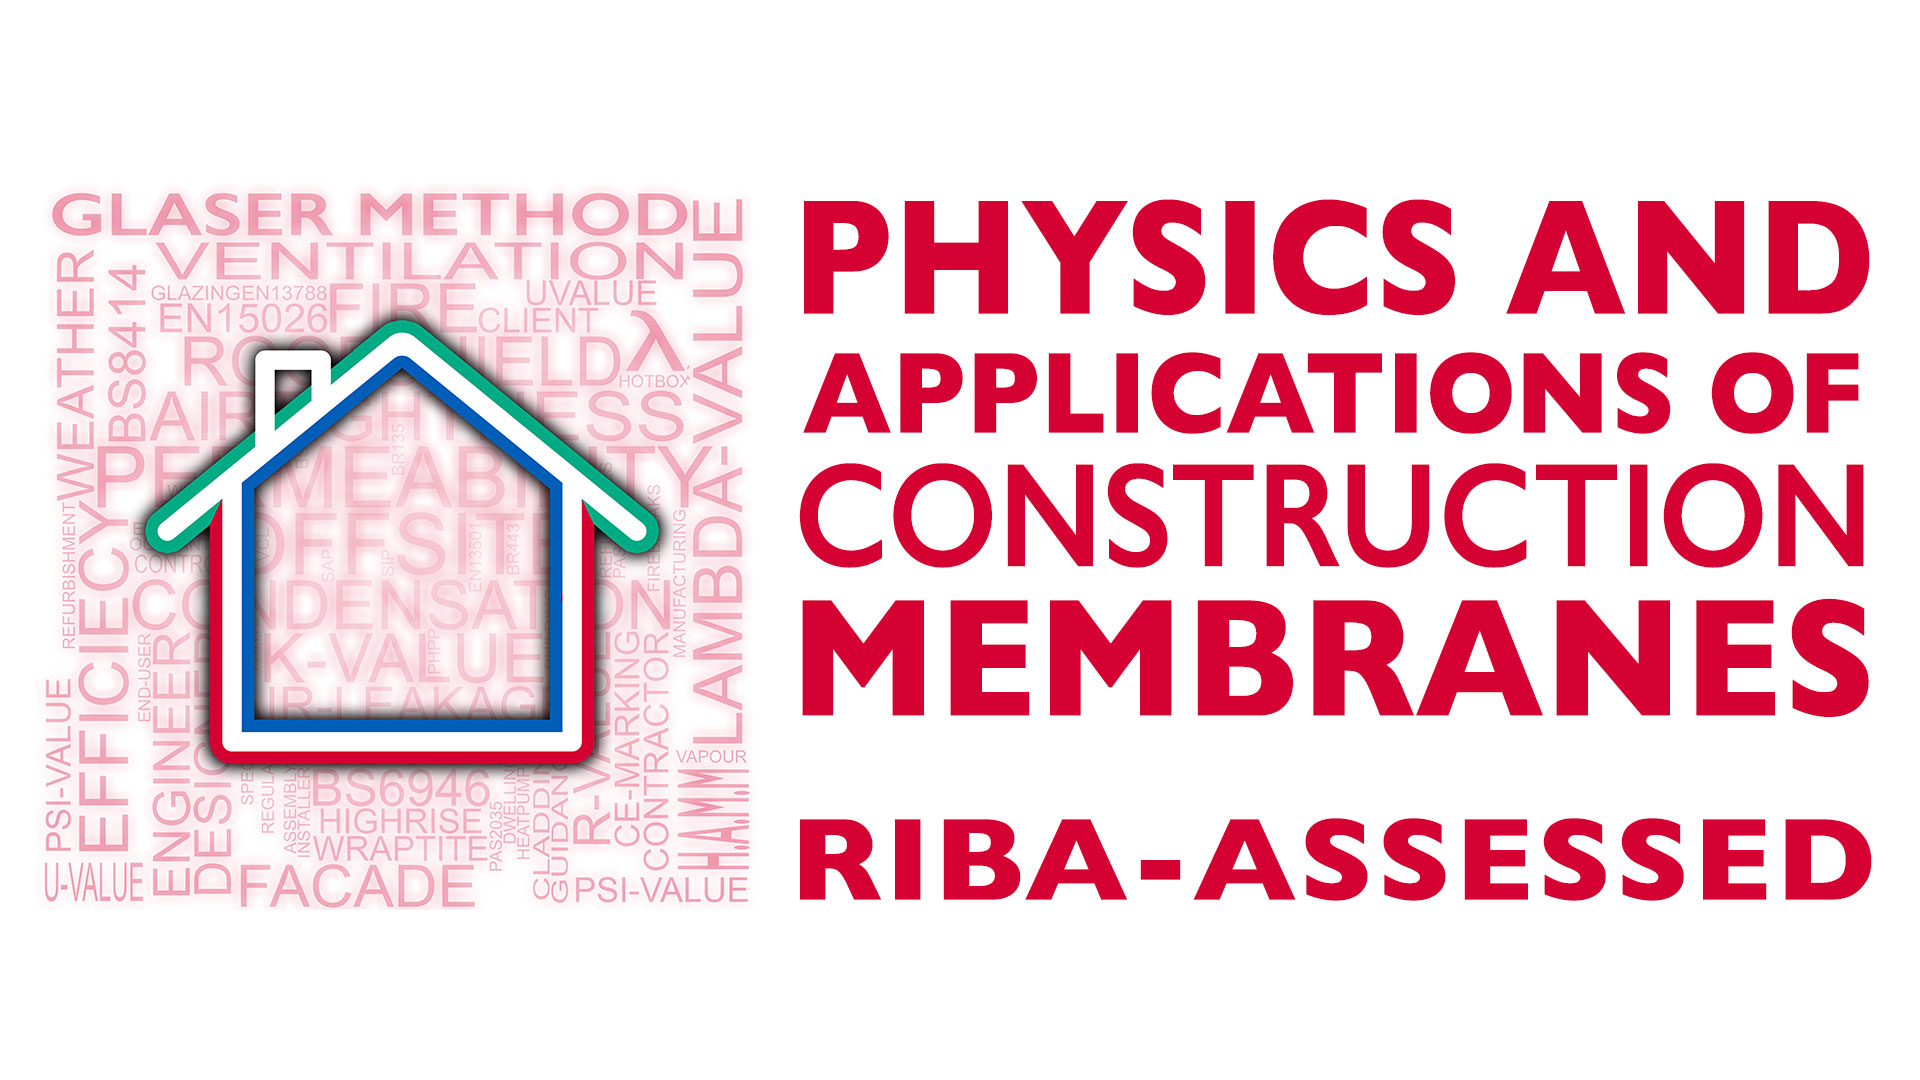 This RIBA-assessed webinar gives an overview of the factors to consider when specifying construction membranes, particularly in projects utilising "Modern Method of Construction" such as advanced timber frame and panelised (CLT or SIP) construction types. It also introduces the adjacent building physics that are influenced by membrane specification and design choices.